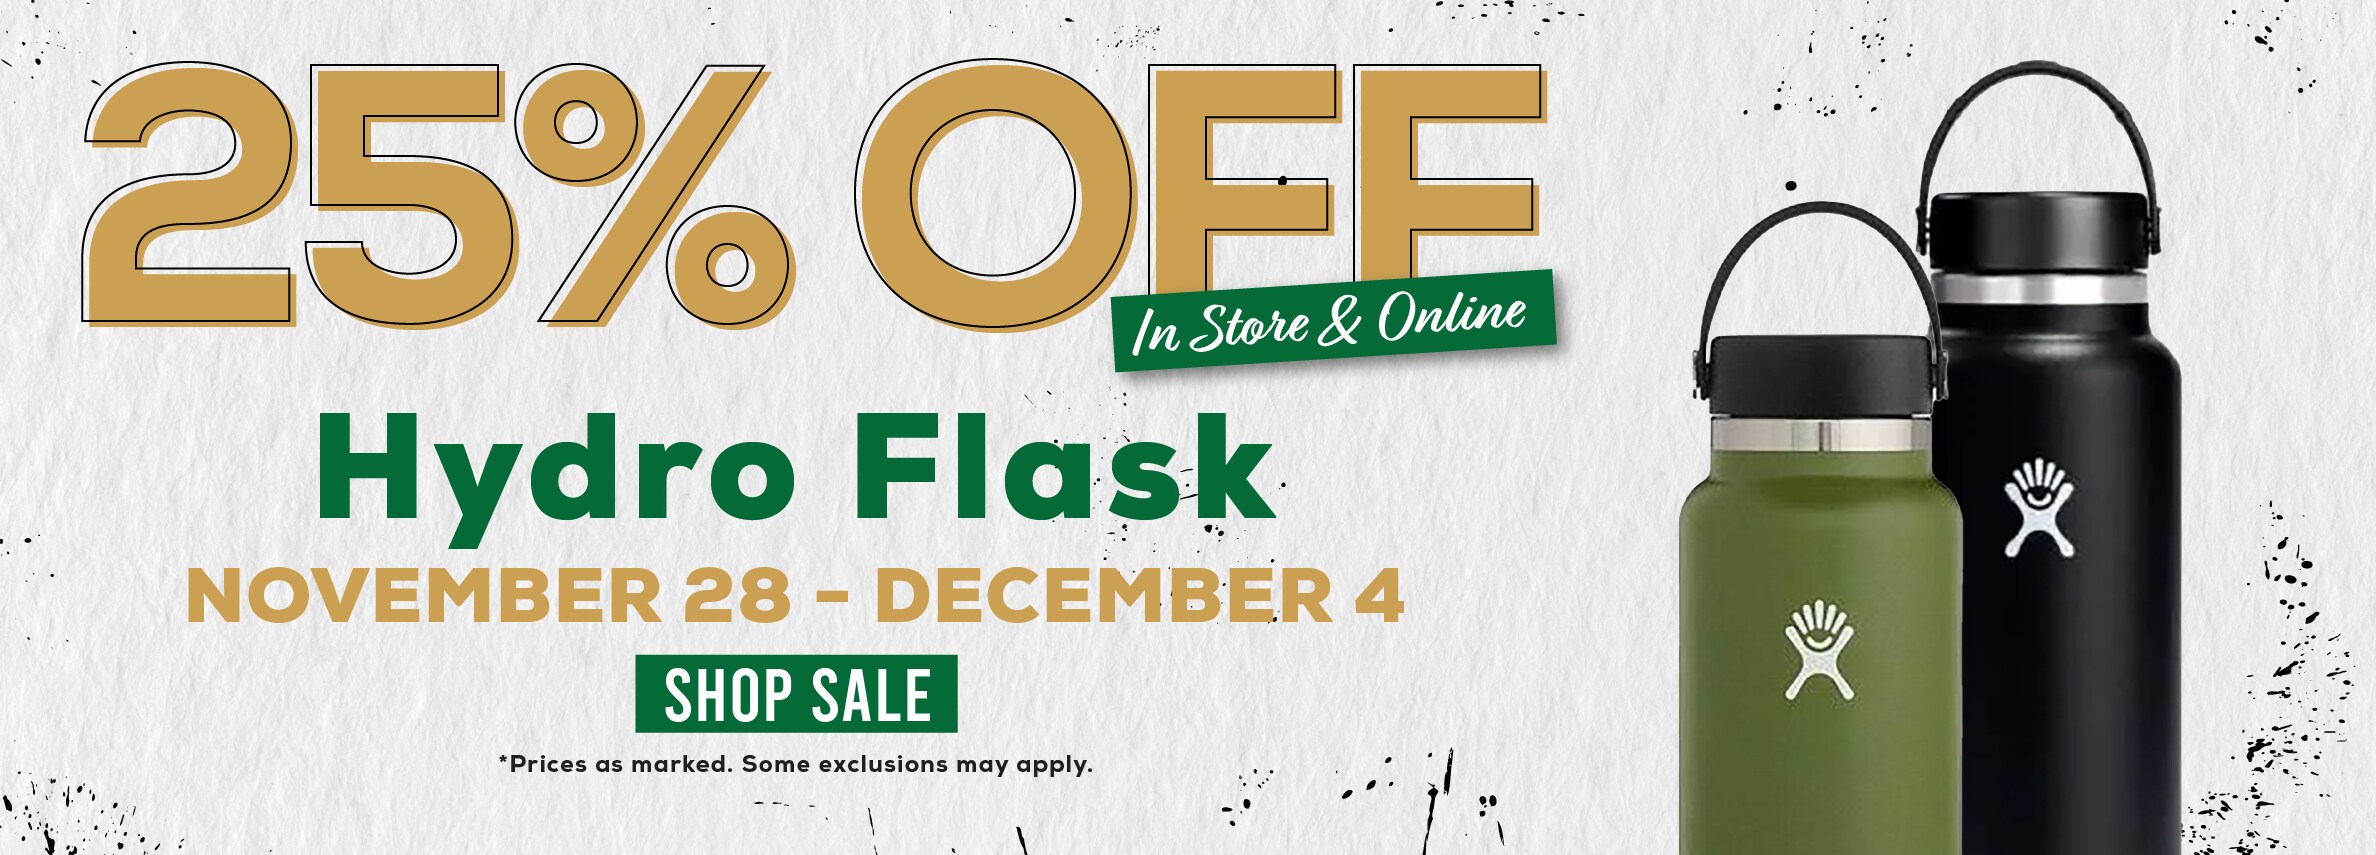 25% Ã�Å¾ff In Store & Online Hydro Flask NOVEMBER 28 - DECEMBER 4 SHOP SALE *Prices as marked. Some exclusions may apply.